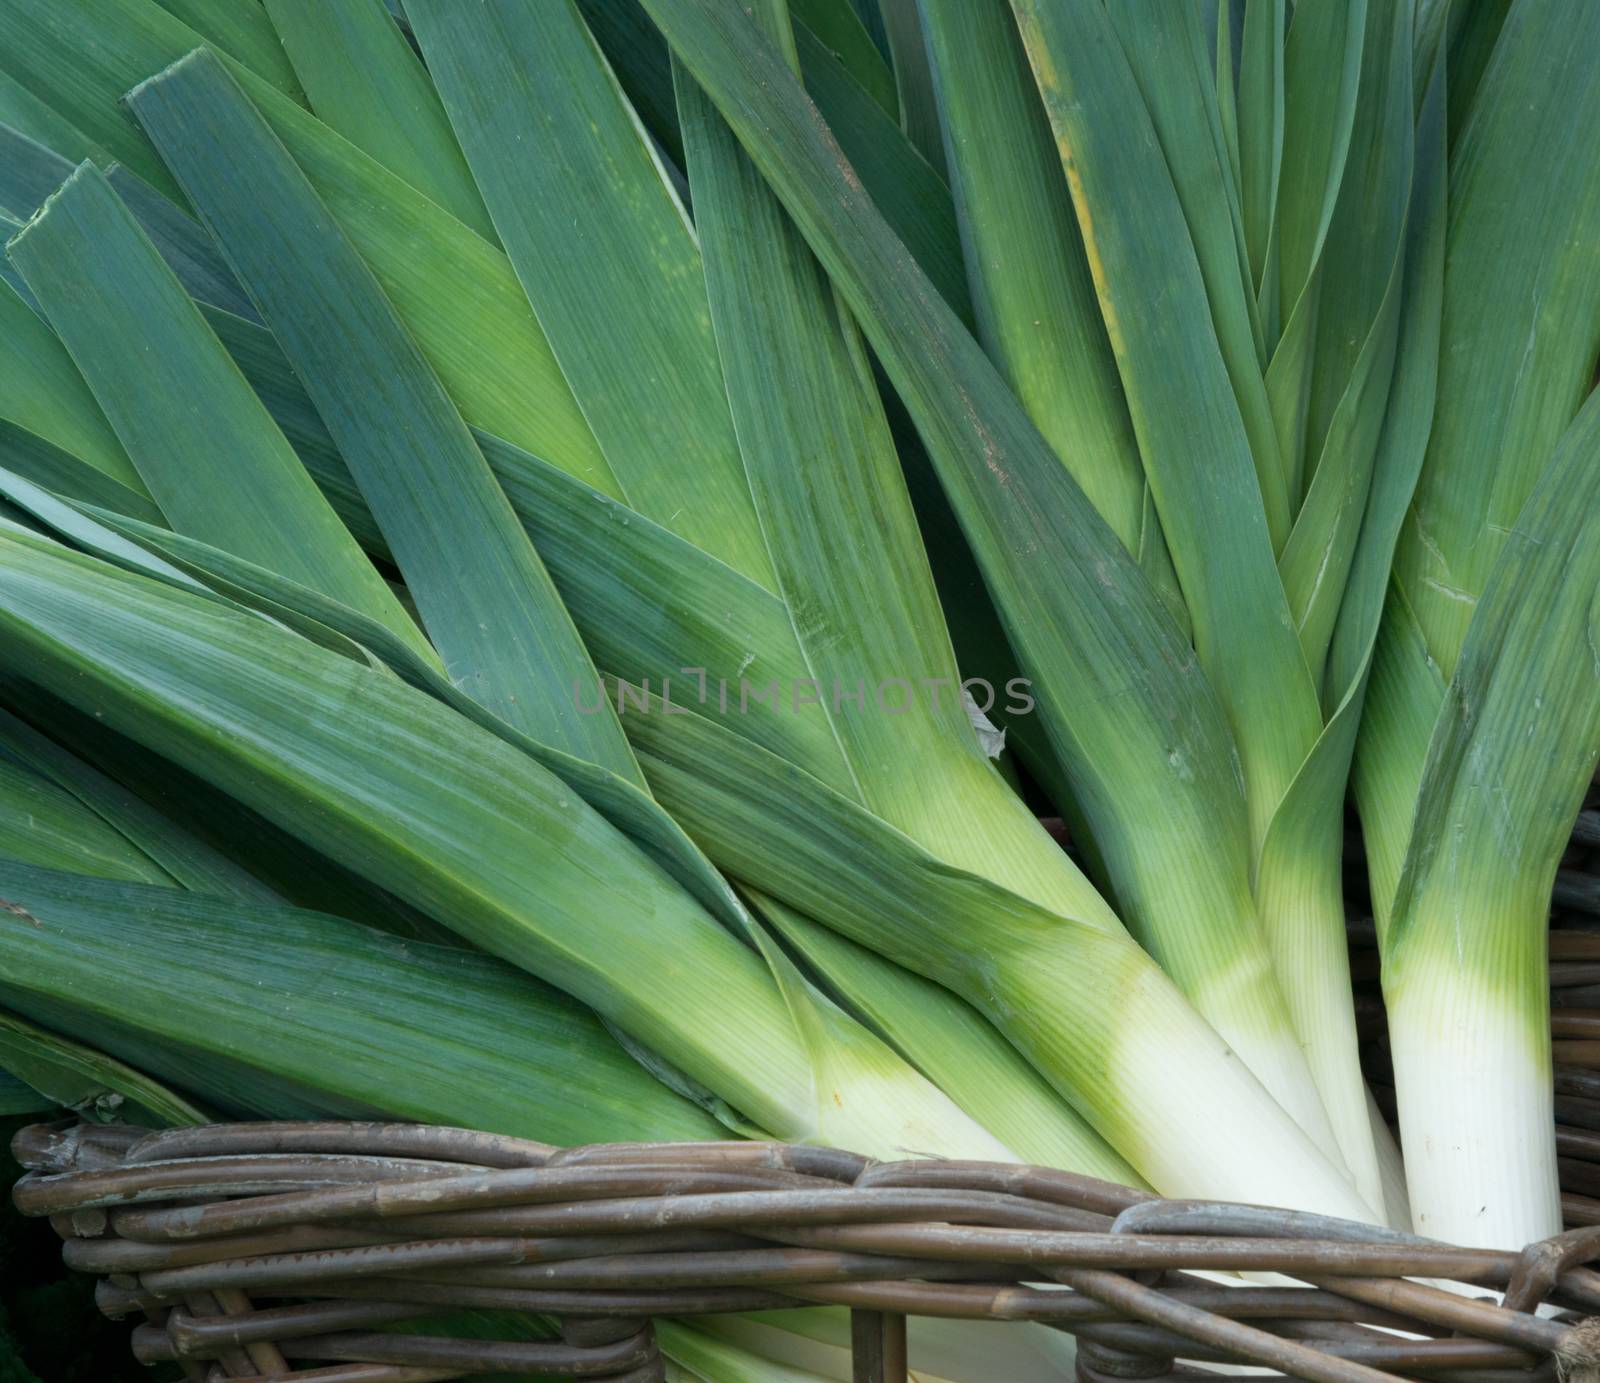 Fresh Leeks for sale on a market stall